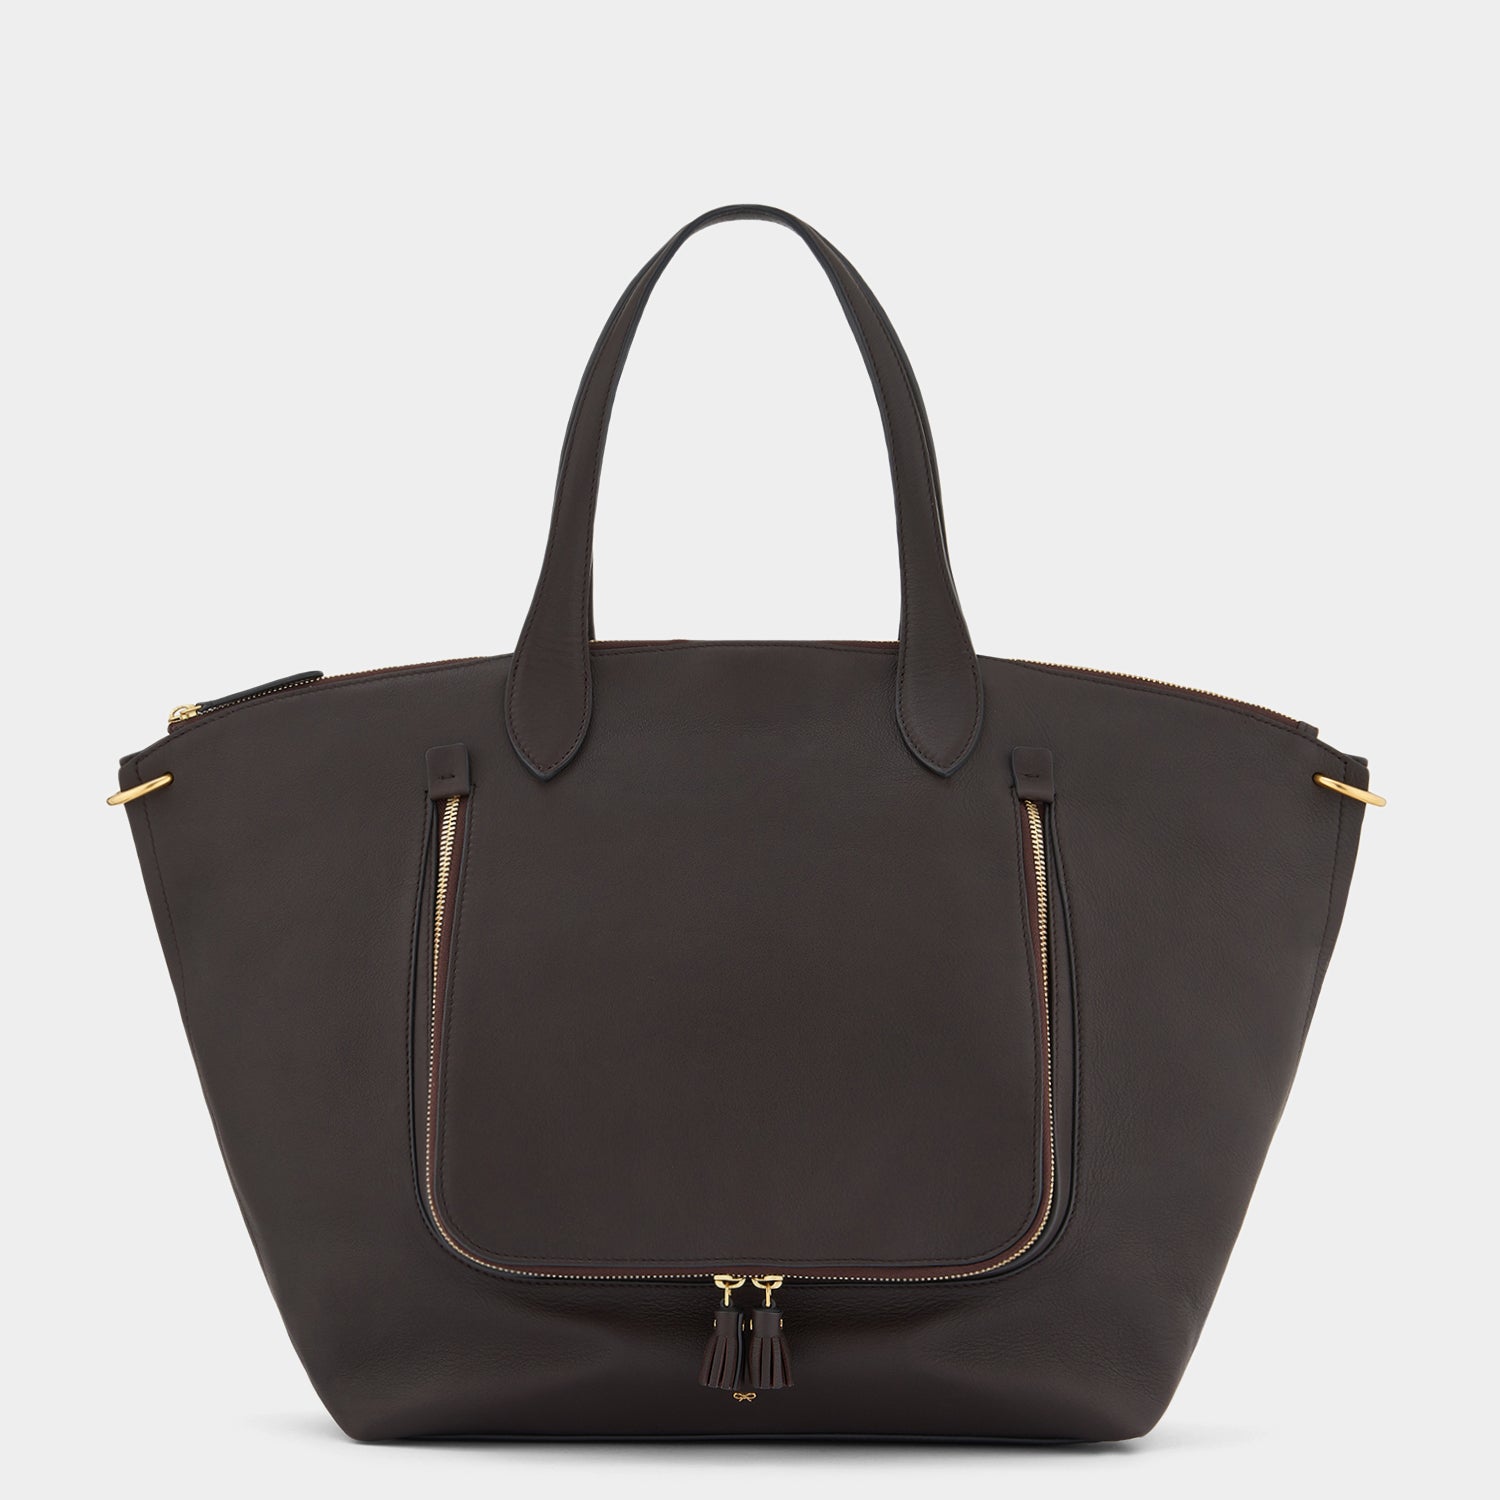 Vere Slouchy Tote